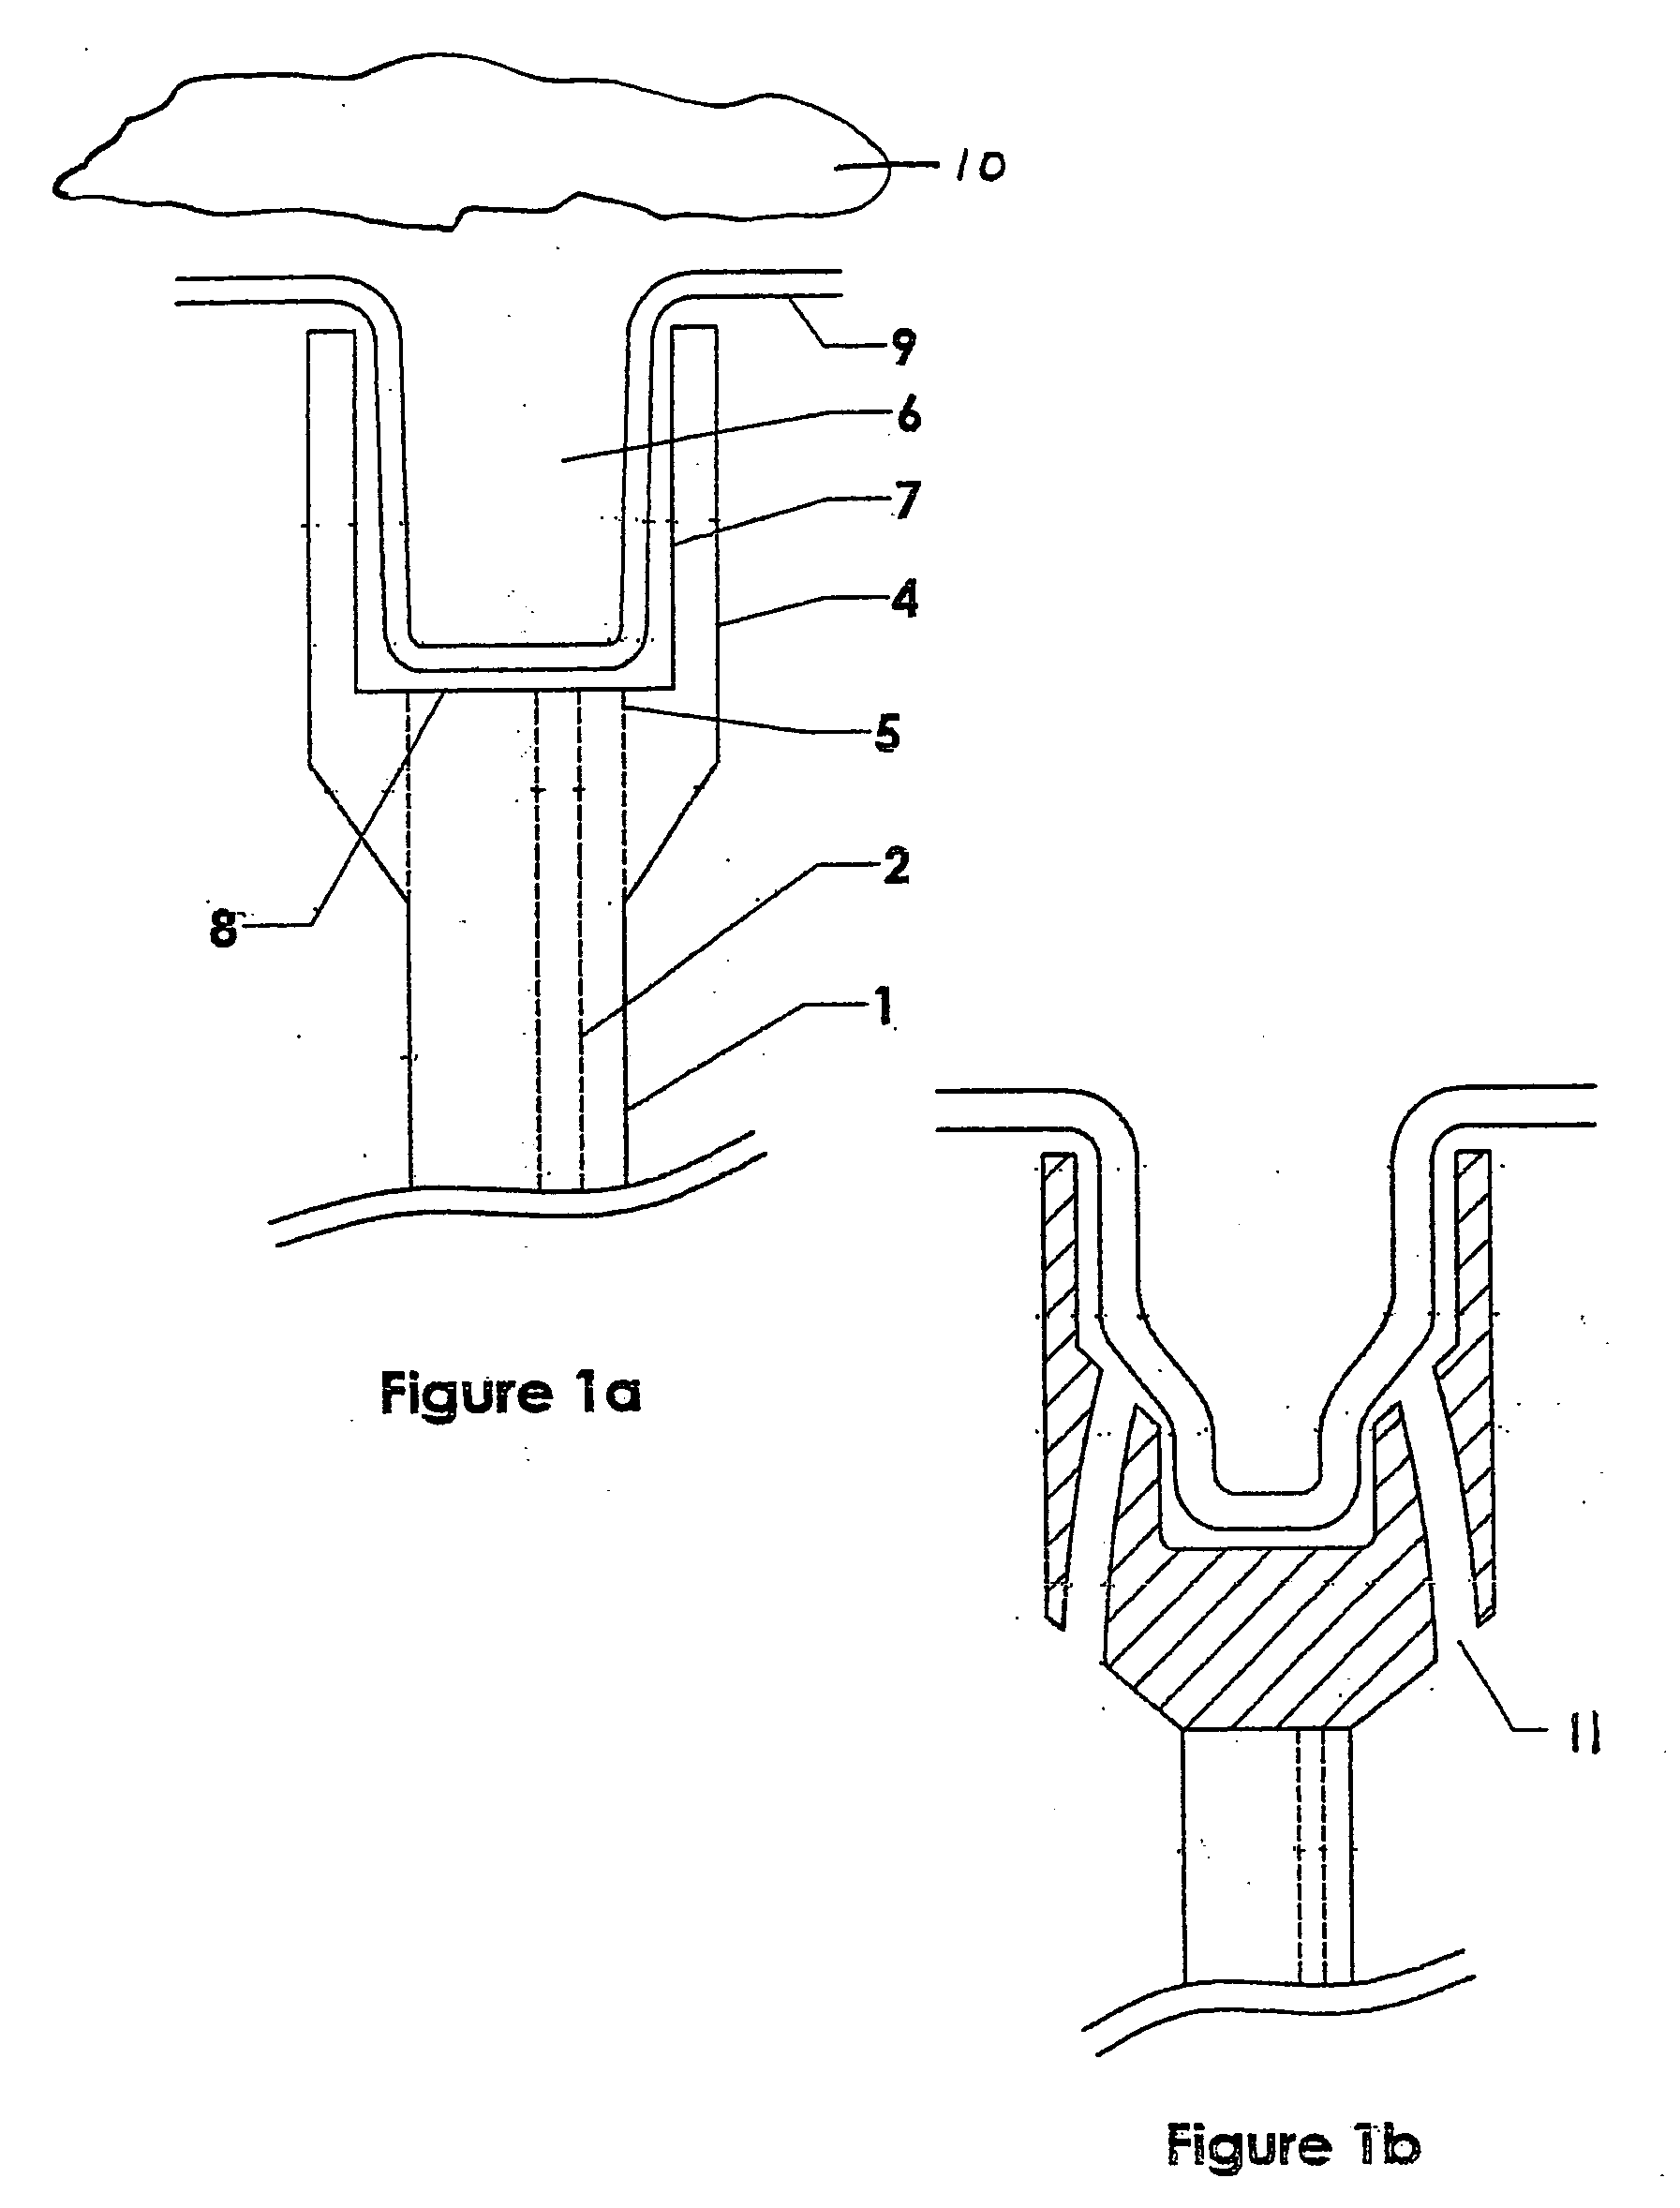 Methods and devices for anchoring to soft tissue